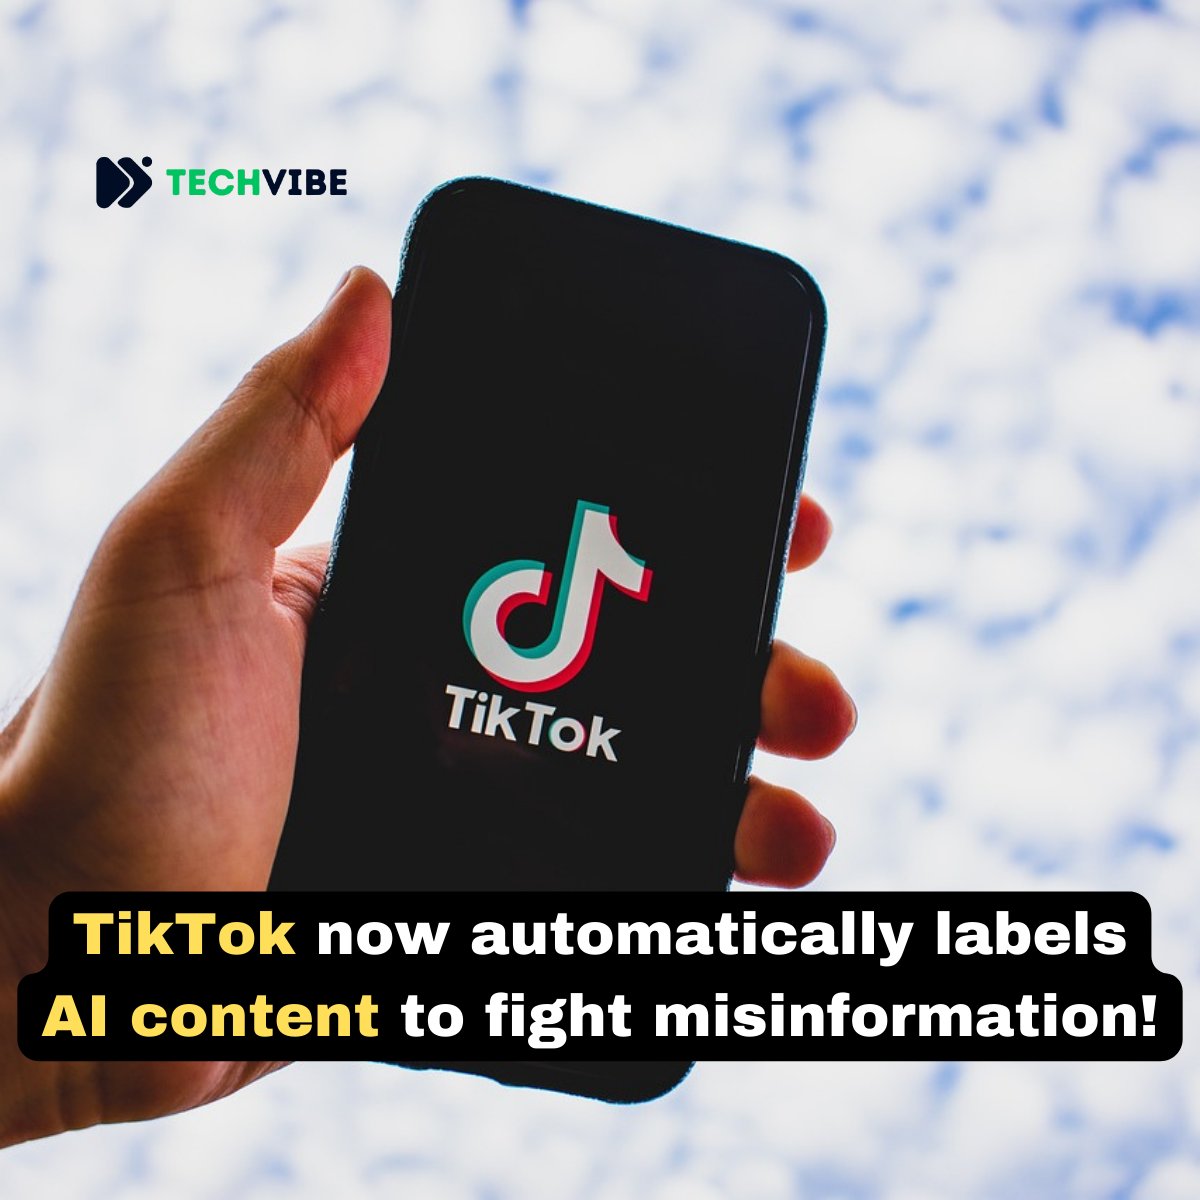 TikTok implements AI content labeling to counter misinformation, alongside media literacy campaigns amidst scrutiny. more: t.ly/6g_er #Tiktok #AI #AIcontent #AInews